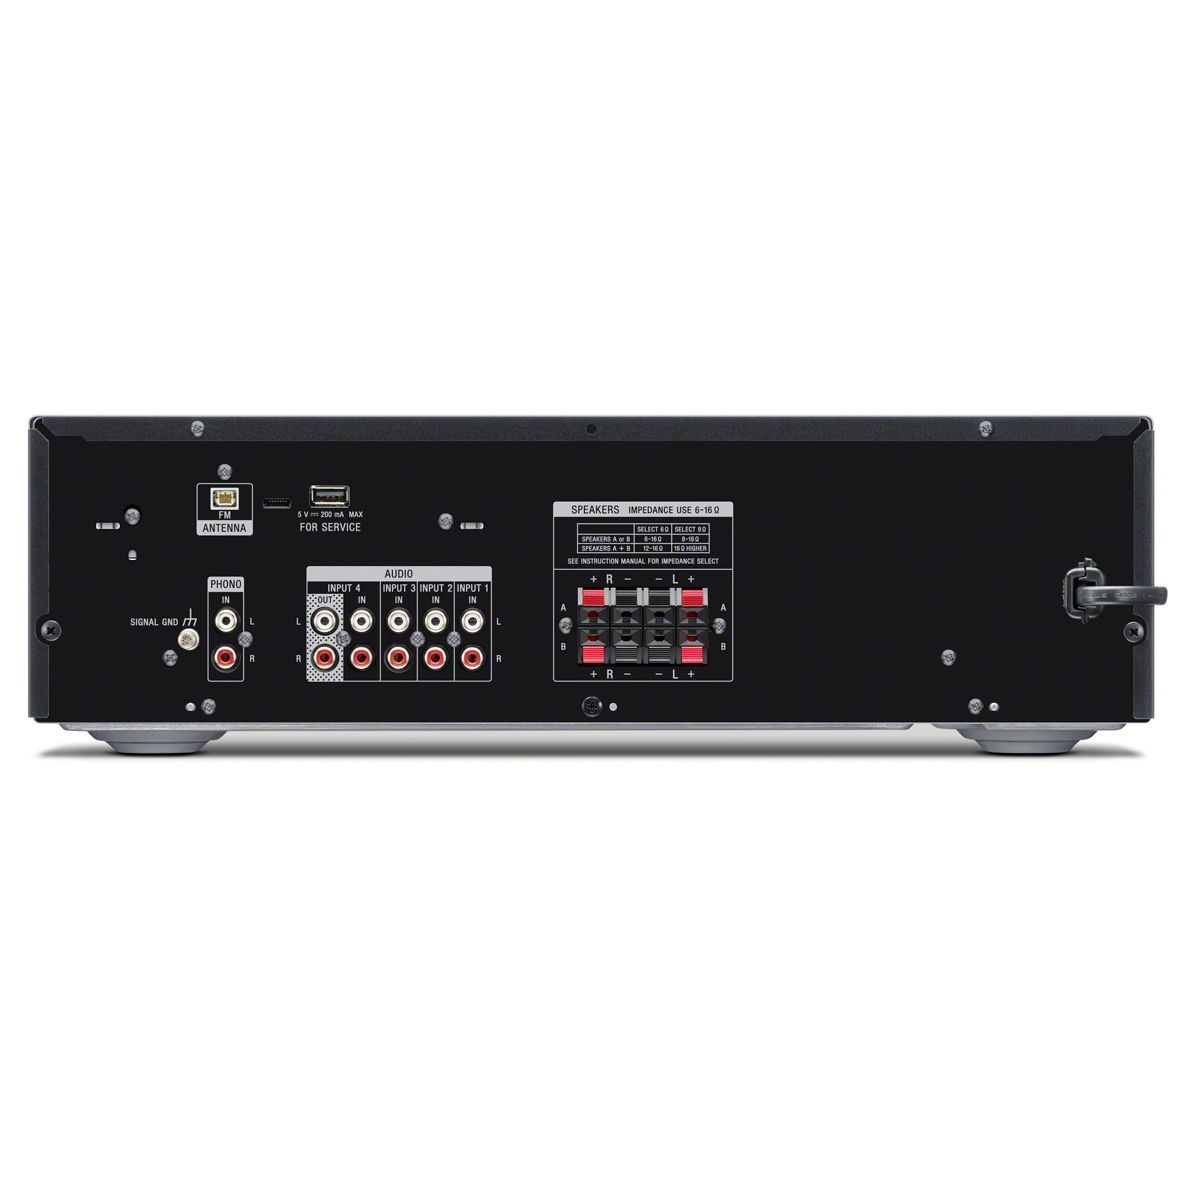 STR-DH190 2-Channel Stereo Receiver - Back View